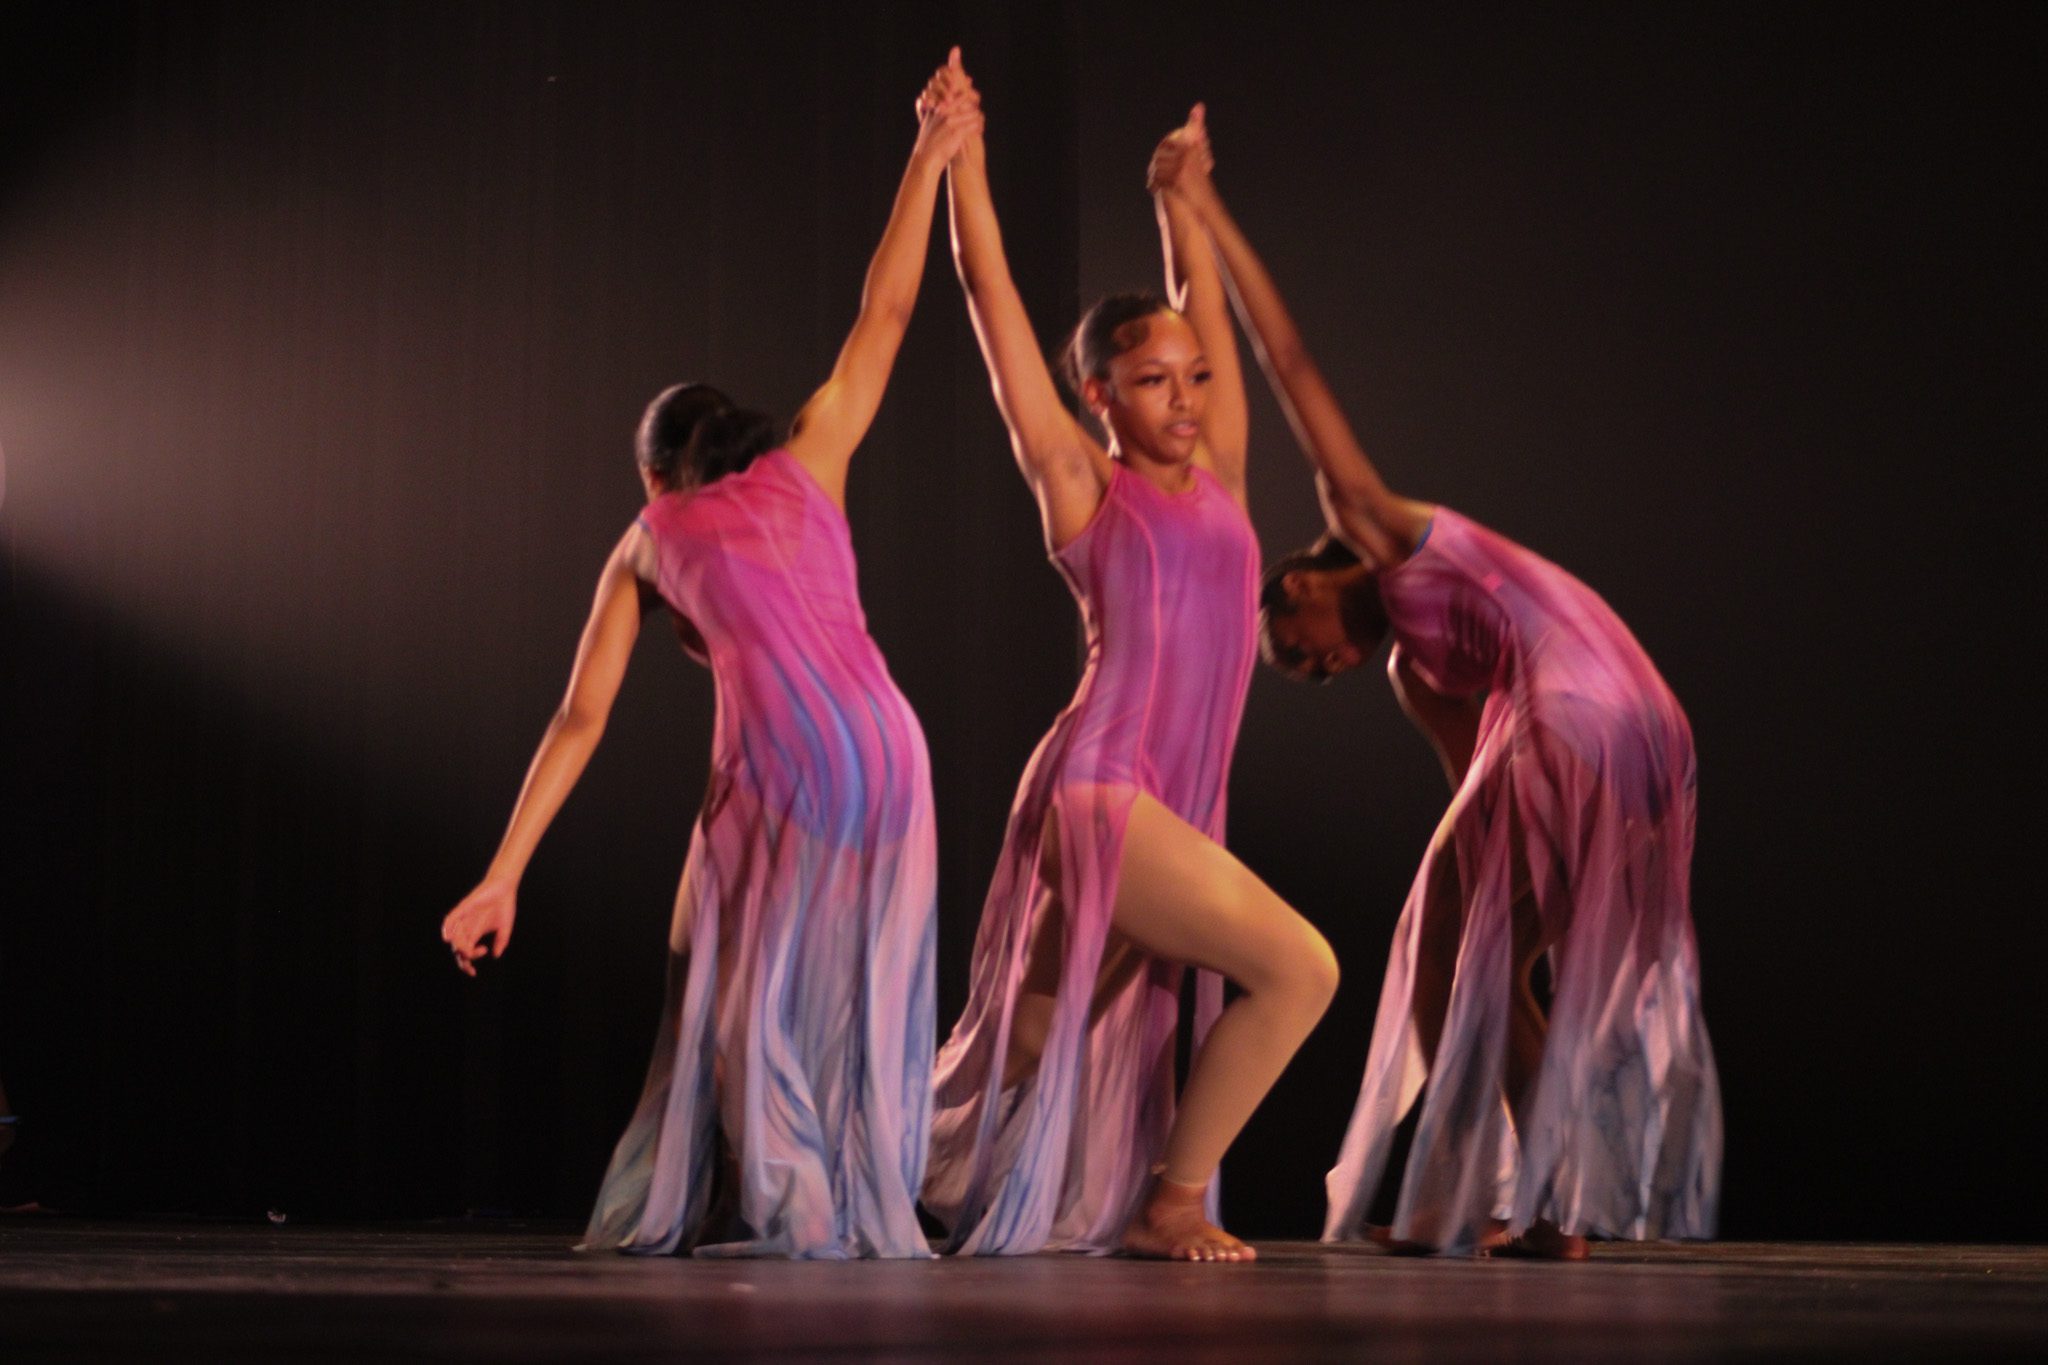 Three dancers are visible. Two of them are holding the third dancer as she moves forward. The dancers are wearing a gradient purple-white like dress. They have their hair pulled into a bun.